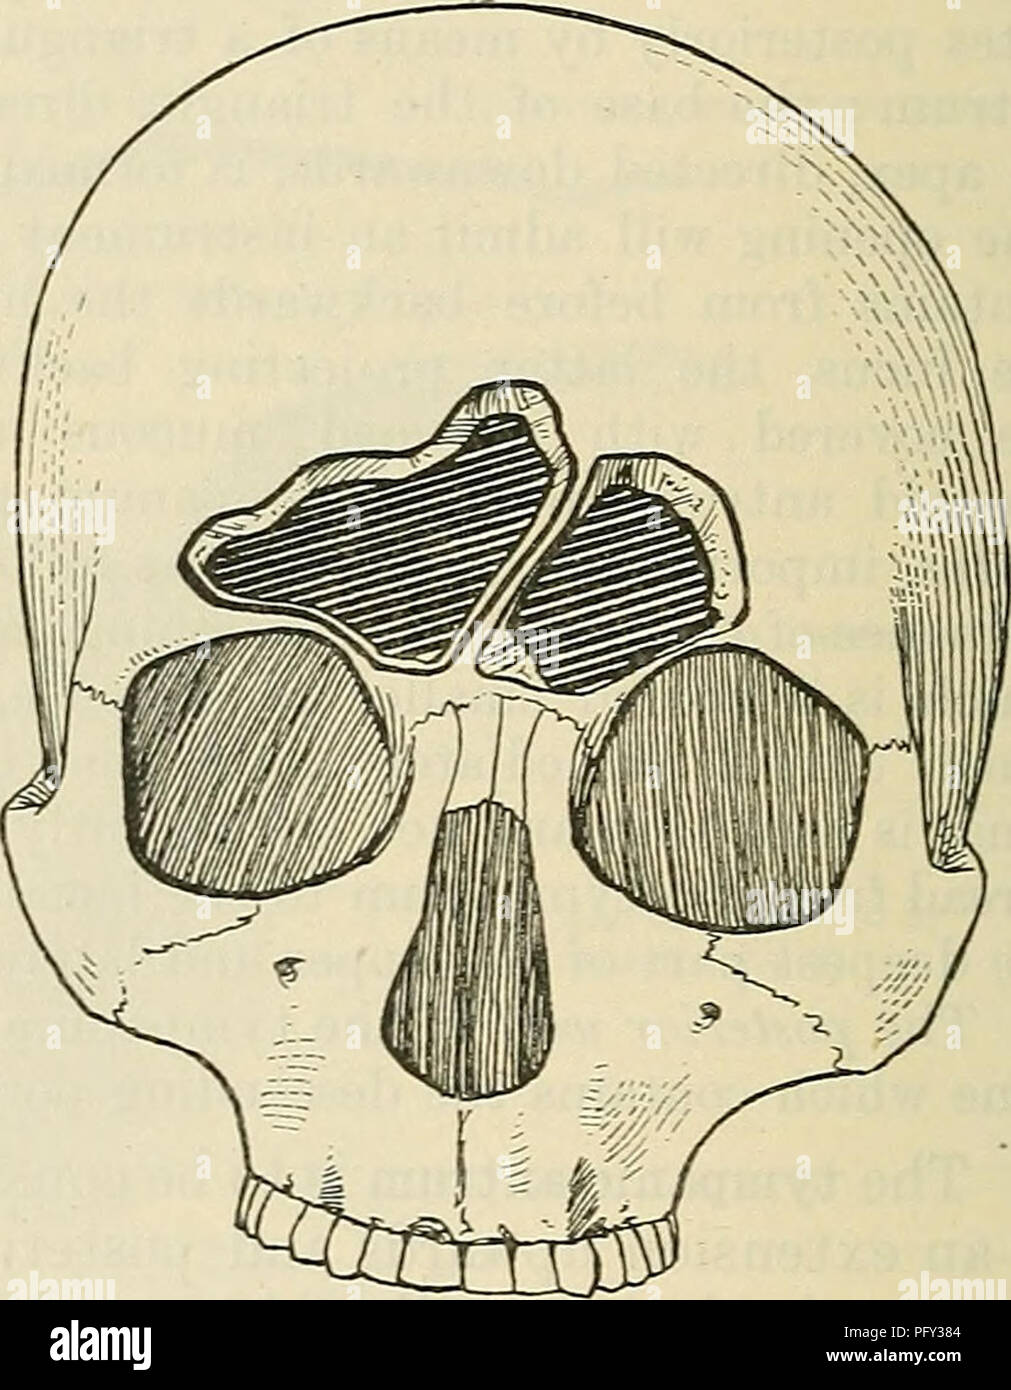 . Cunningham's Text-book of anatomy. Anatomy. Fig. 1075.—Frontal Sinuses of Average Dimensions, with a Medial Septum (Logan Turner). Fig. 1076. — A Large Right Frontal Sinus with Septum oblique to the Left (Logan Turner). form the mastoid cells, which radiate from the antrum, and either directly or indirectly communicate with it by small openings. In the pneumatic type of mastoid the whole of the process is excavated by these cells, which extend upwards into the squamous portion, forwards to the posterior wall of the osseous meatus (border-cells), and backwards into the occipital bone. Pus ret Stock Photo